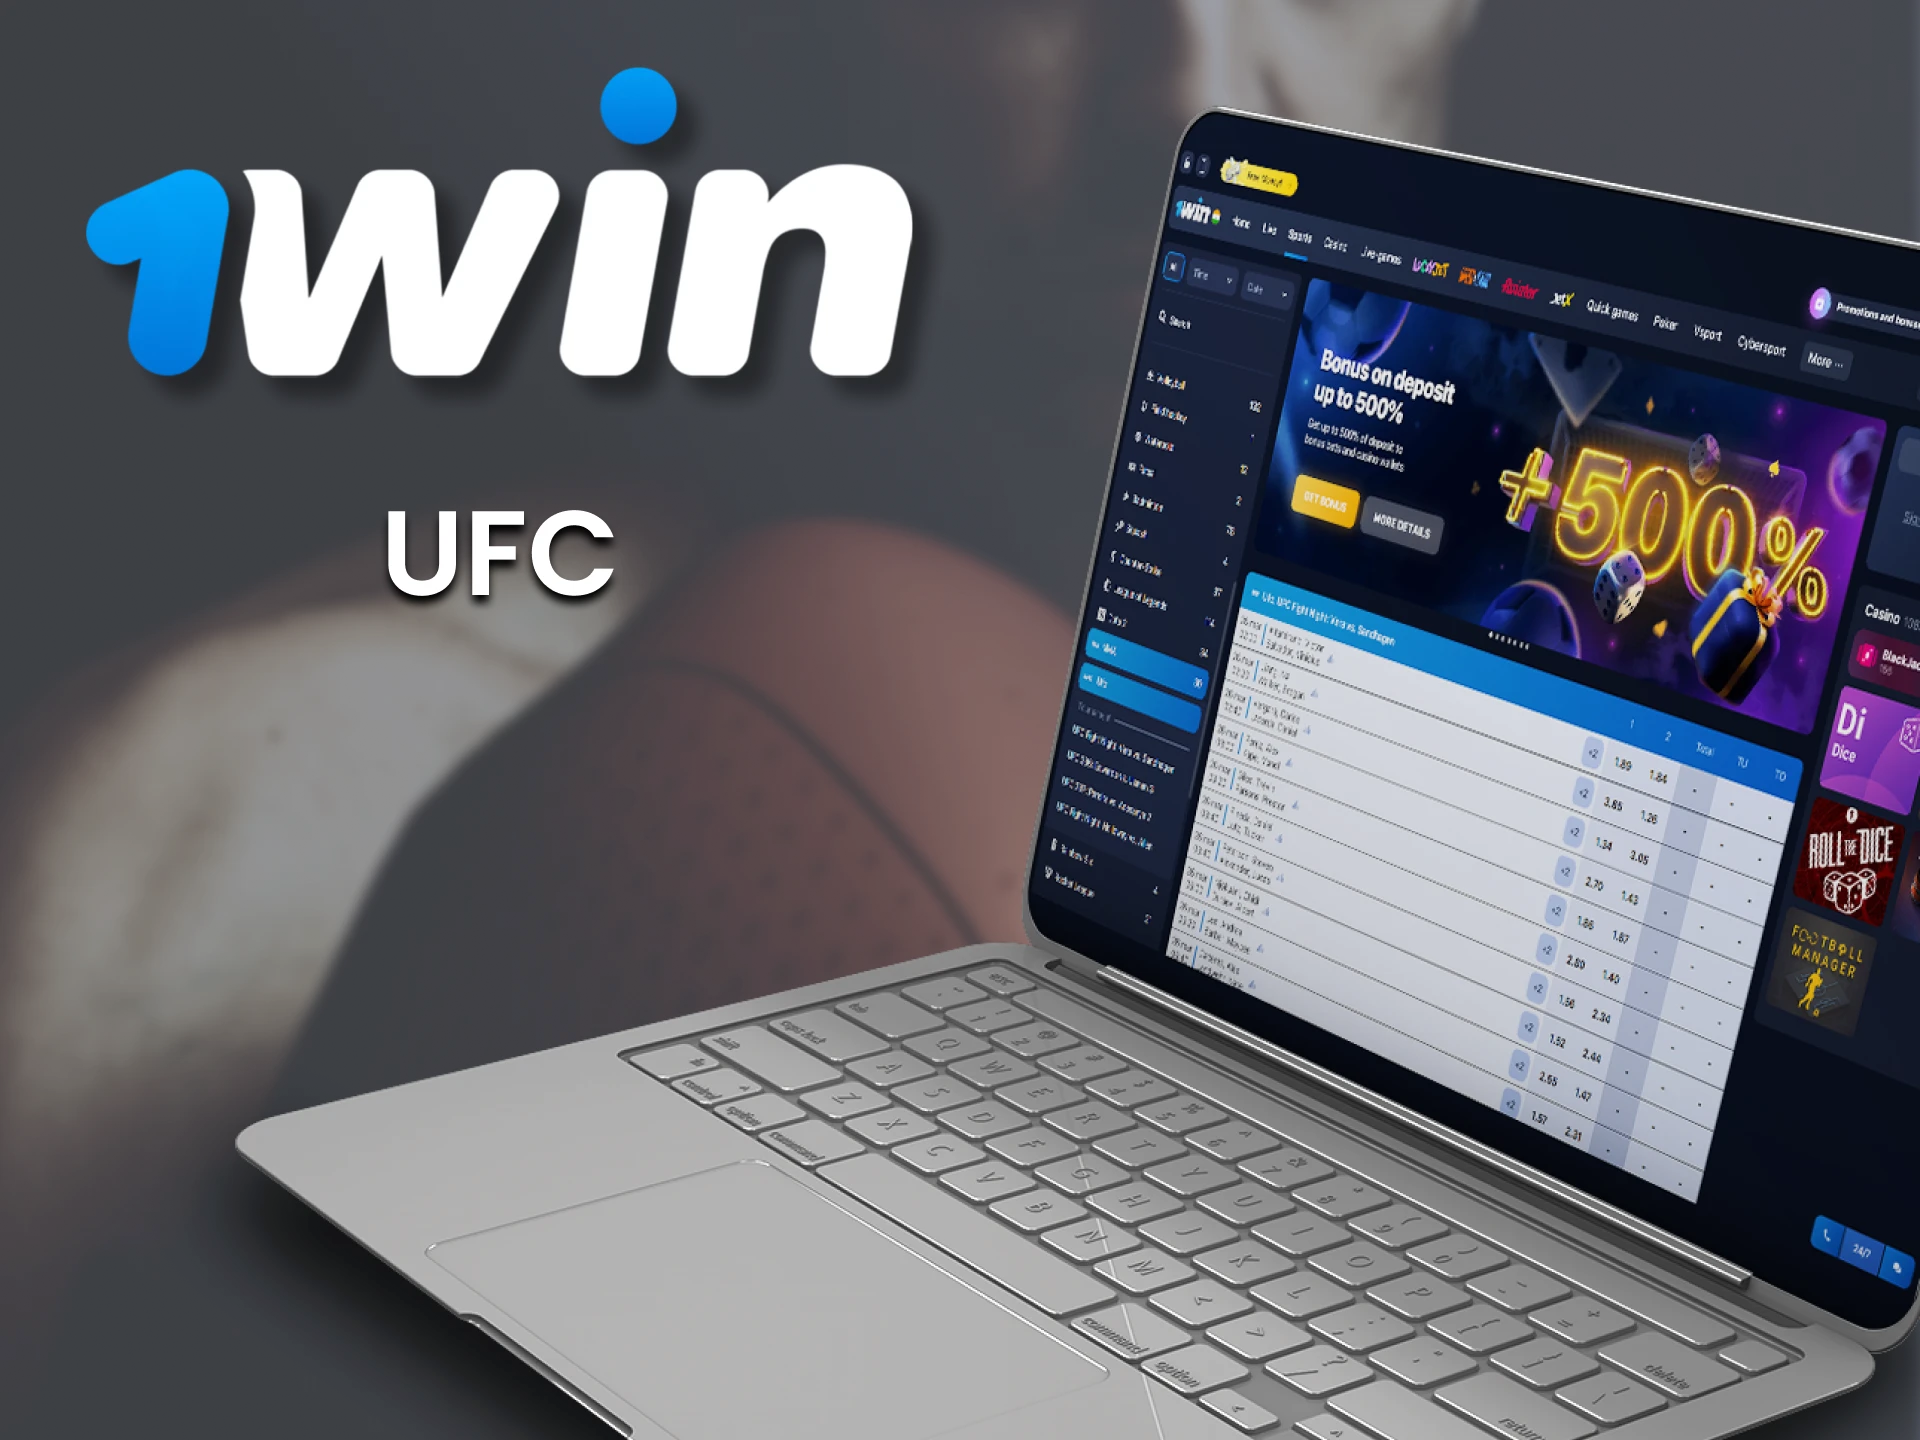 With 1win you have the opportunity to bet on the UFC.